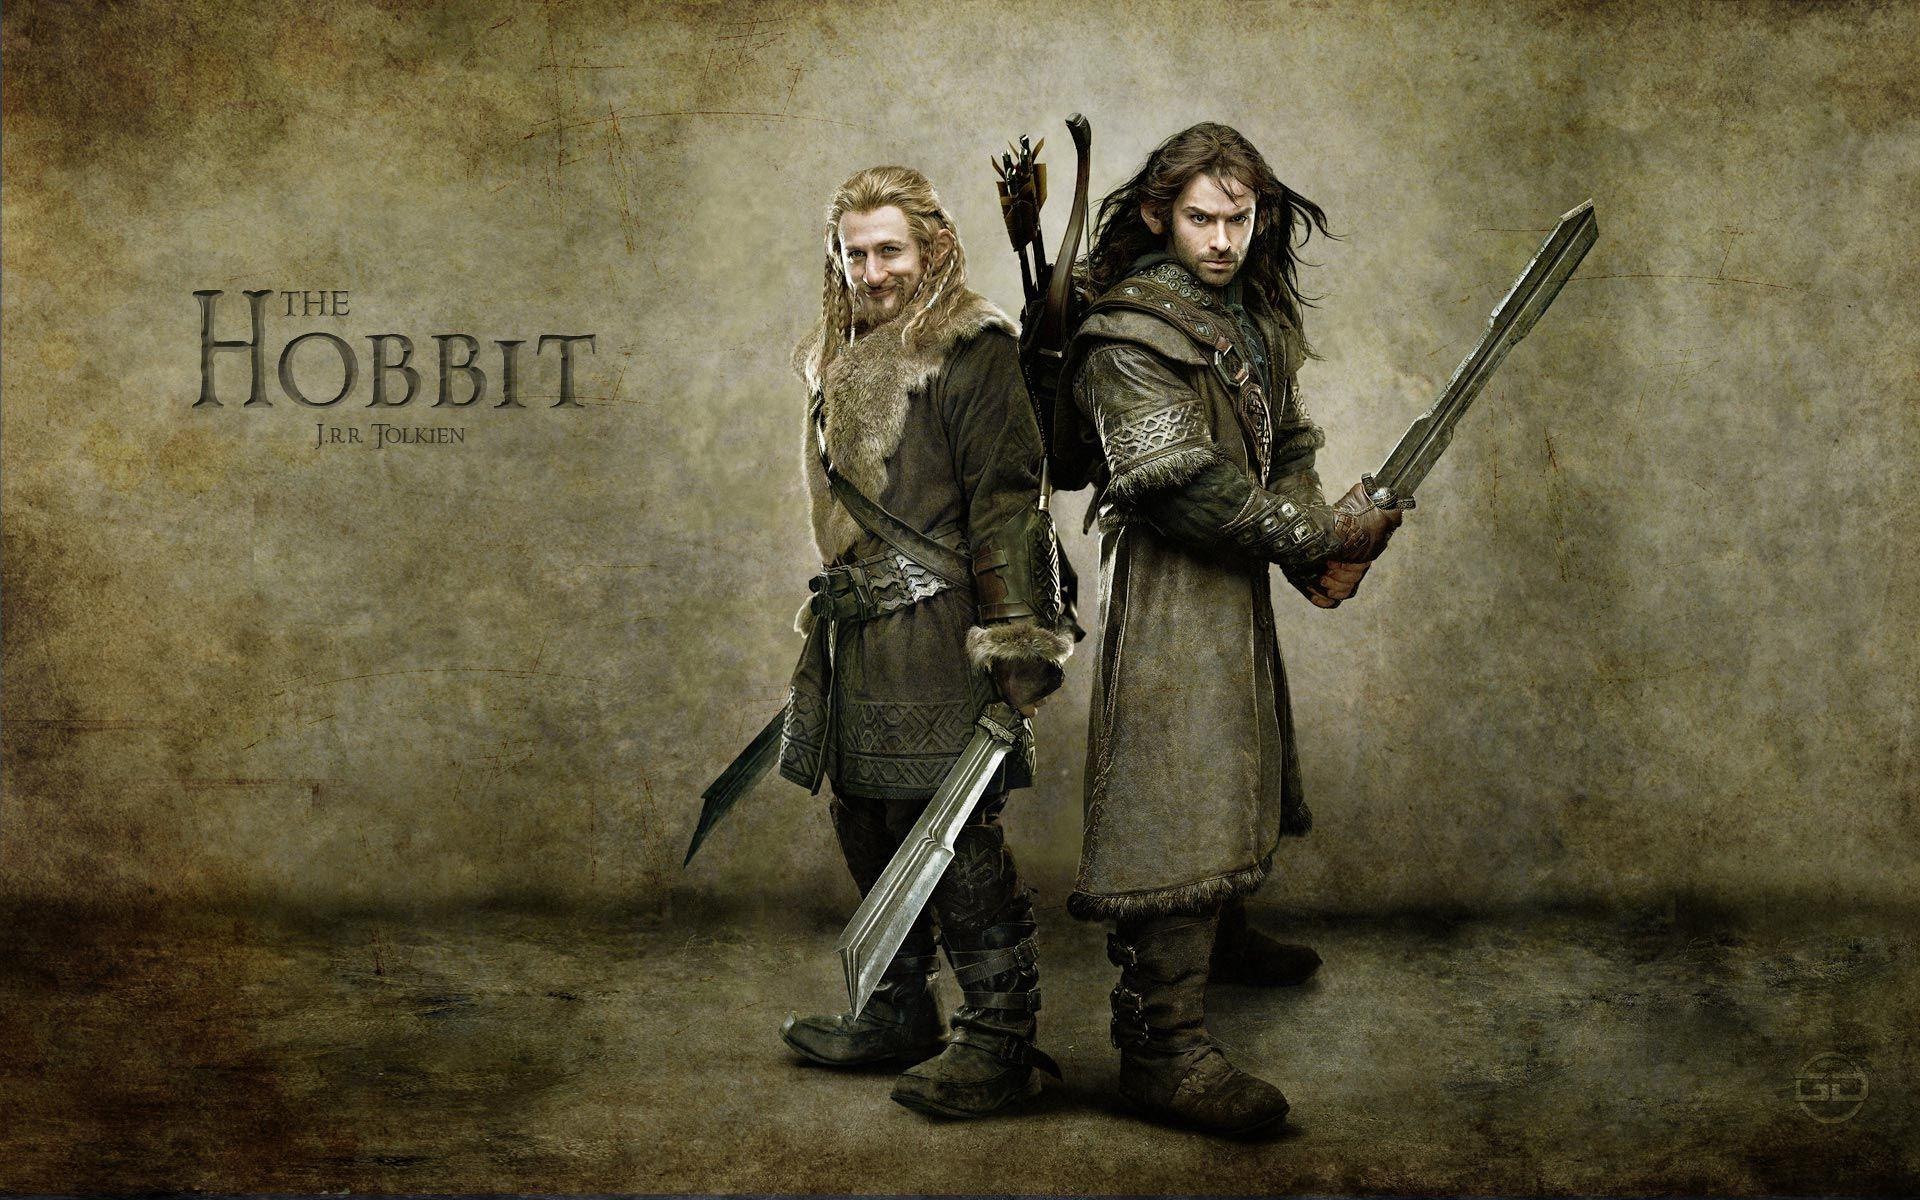 The Hobbit: An Unexpected Journey HD wallpapers #8 - 1920x1200